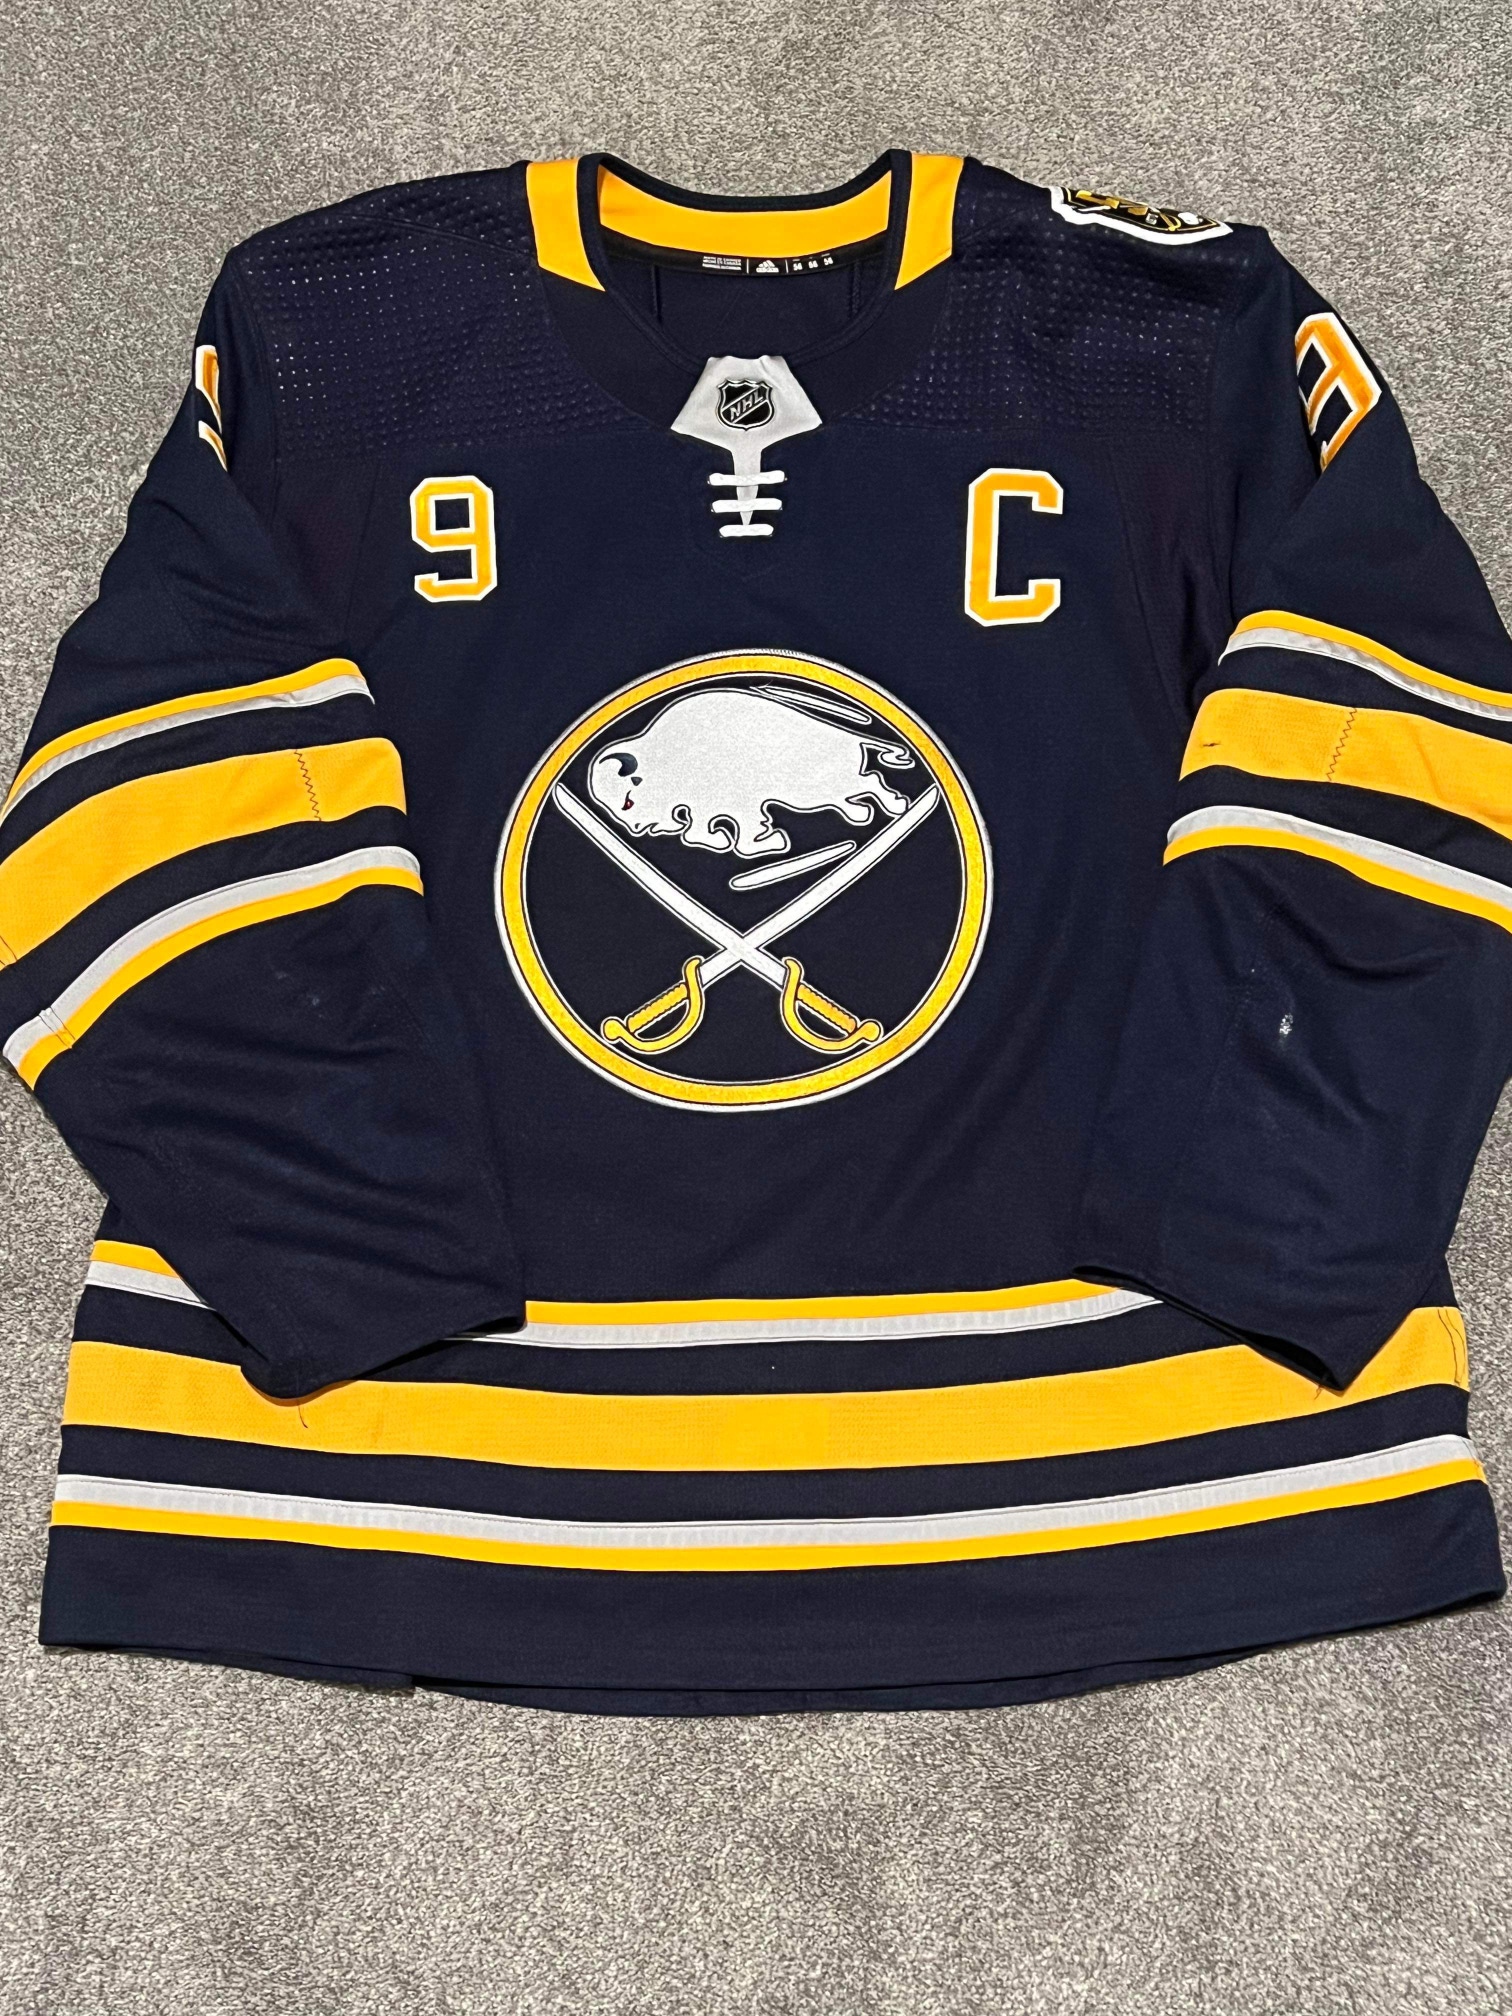 Matched 2019-20 Eichel Sabres 50th Anniversary Captain Set 2 Navy Jersey w/ LOA